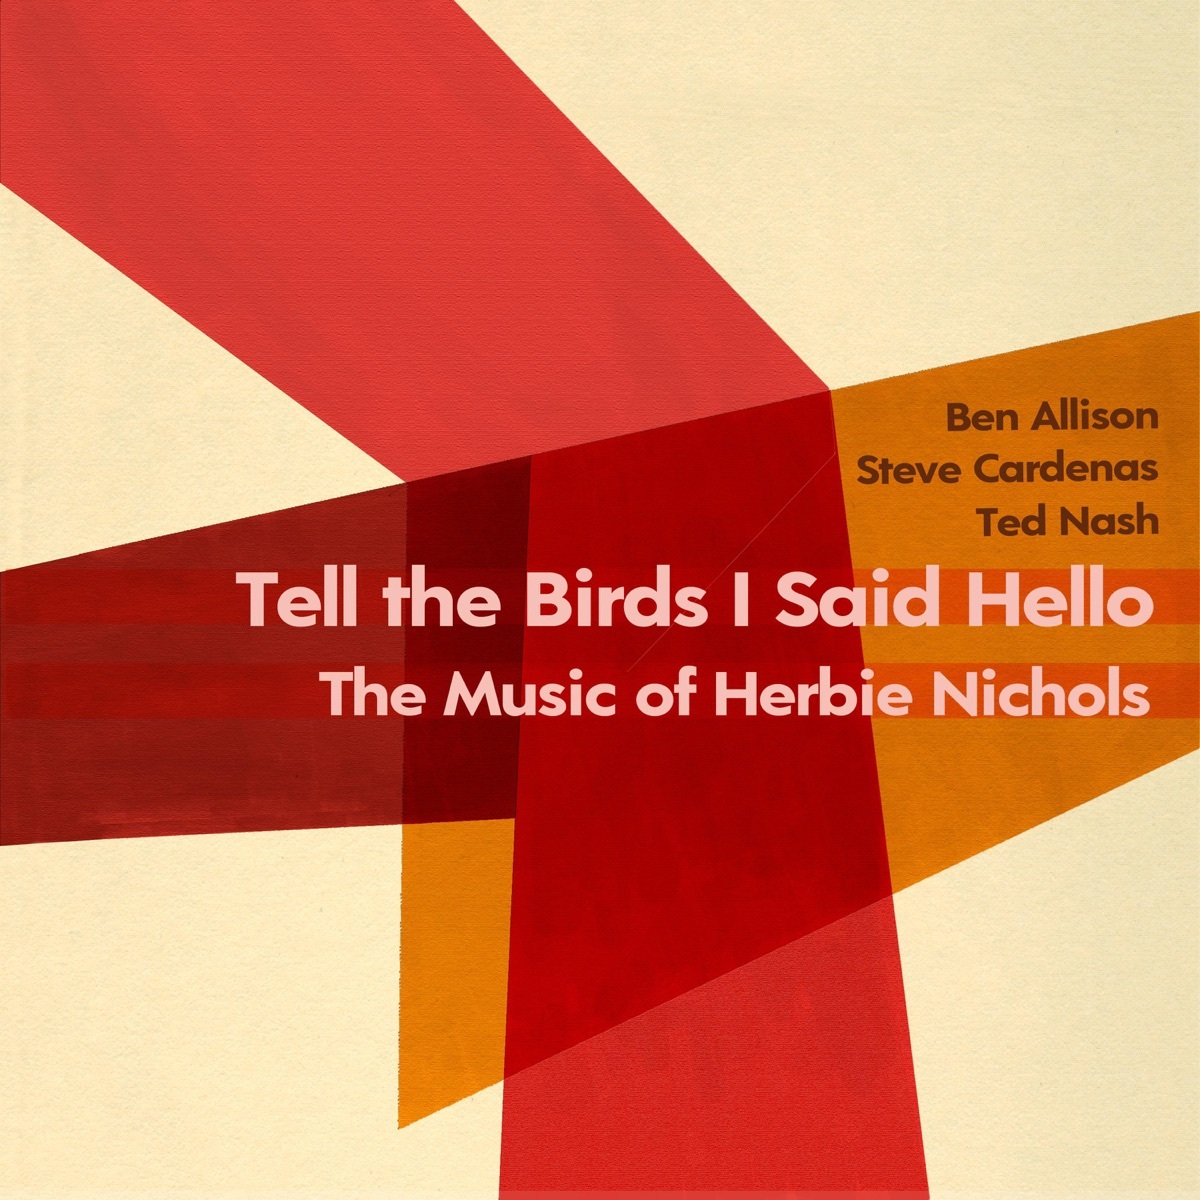 Tell the Birds I Said Hello The Music of Herbie Nichols - Ted Nash